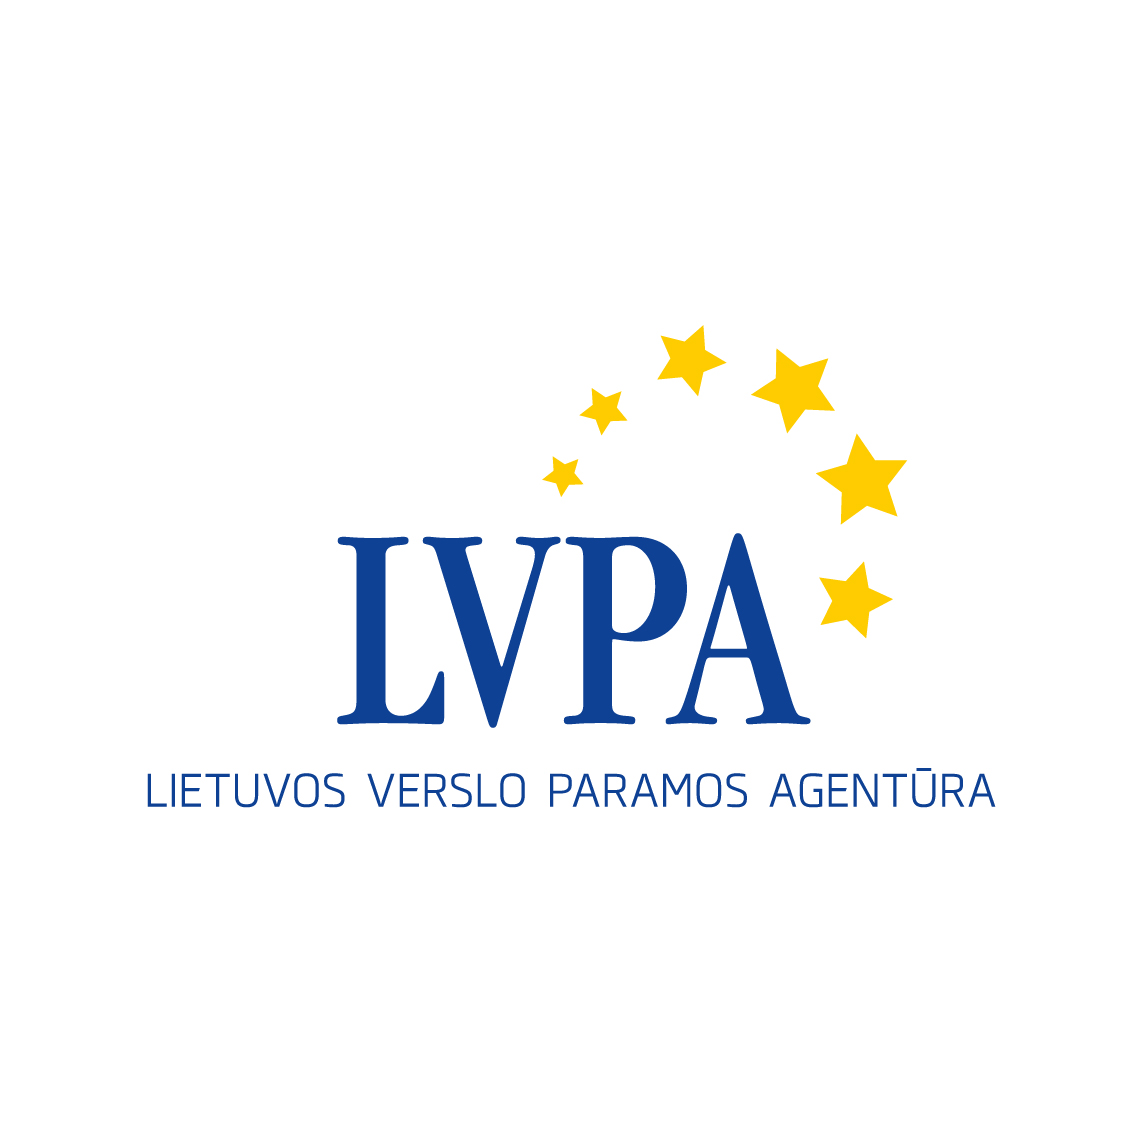 Lithuanian Business Support Agency (LVPA) logo